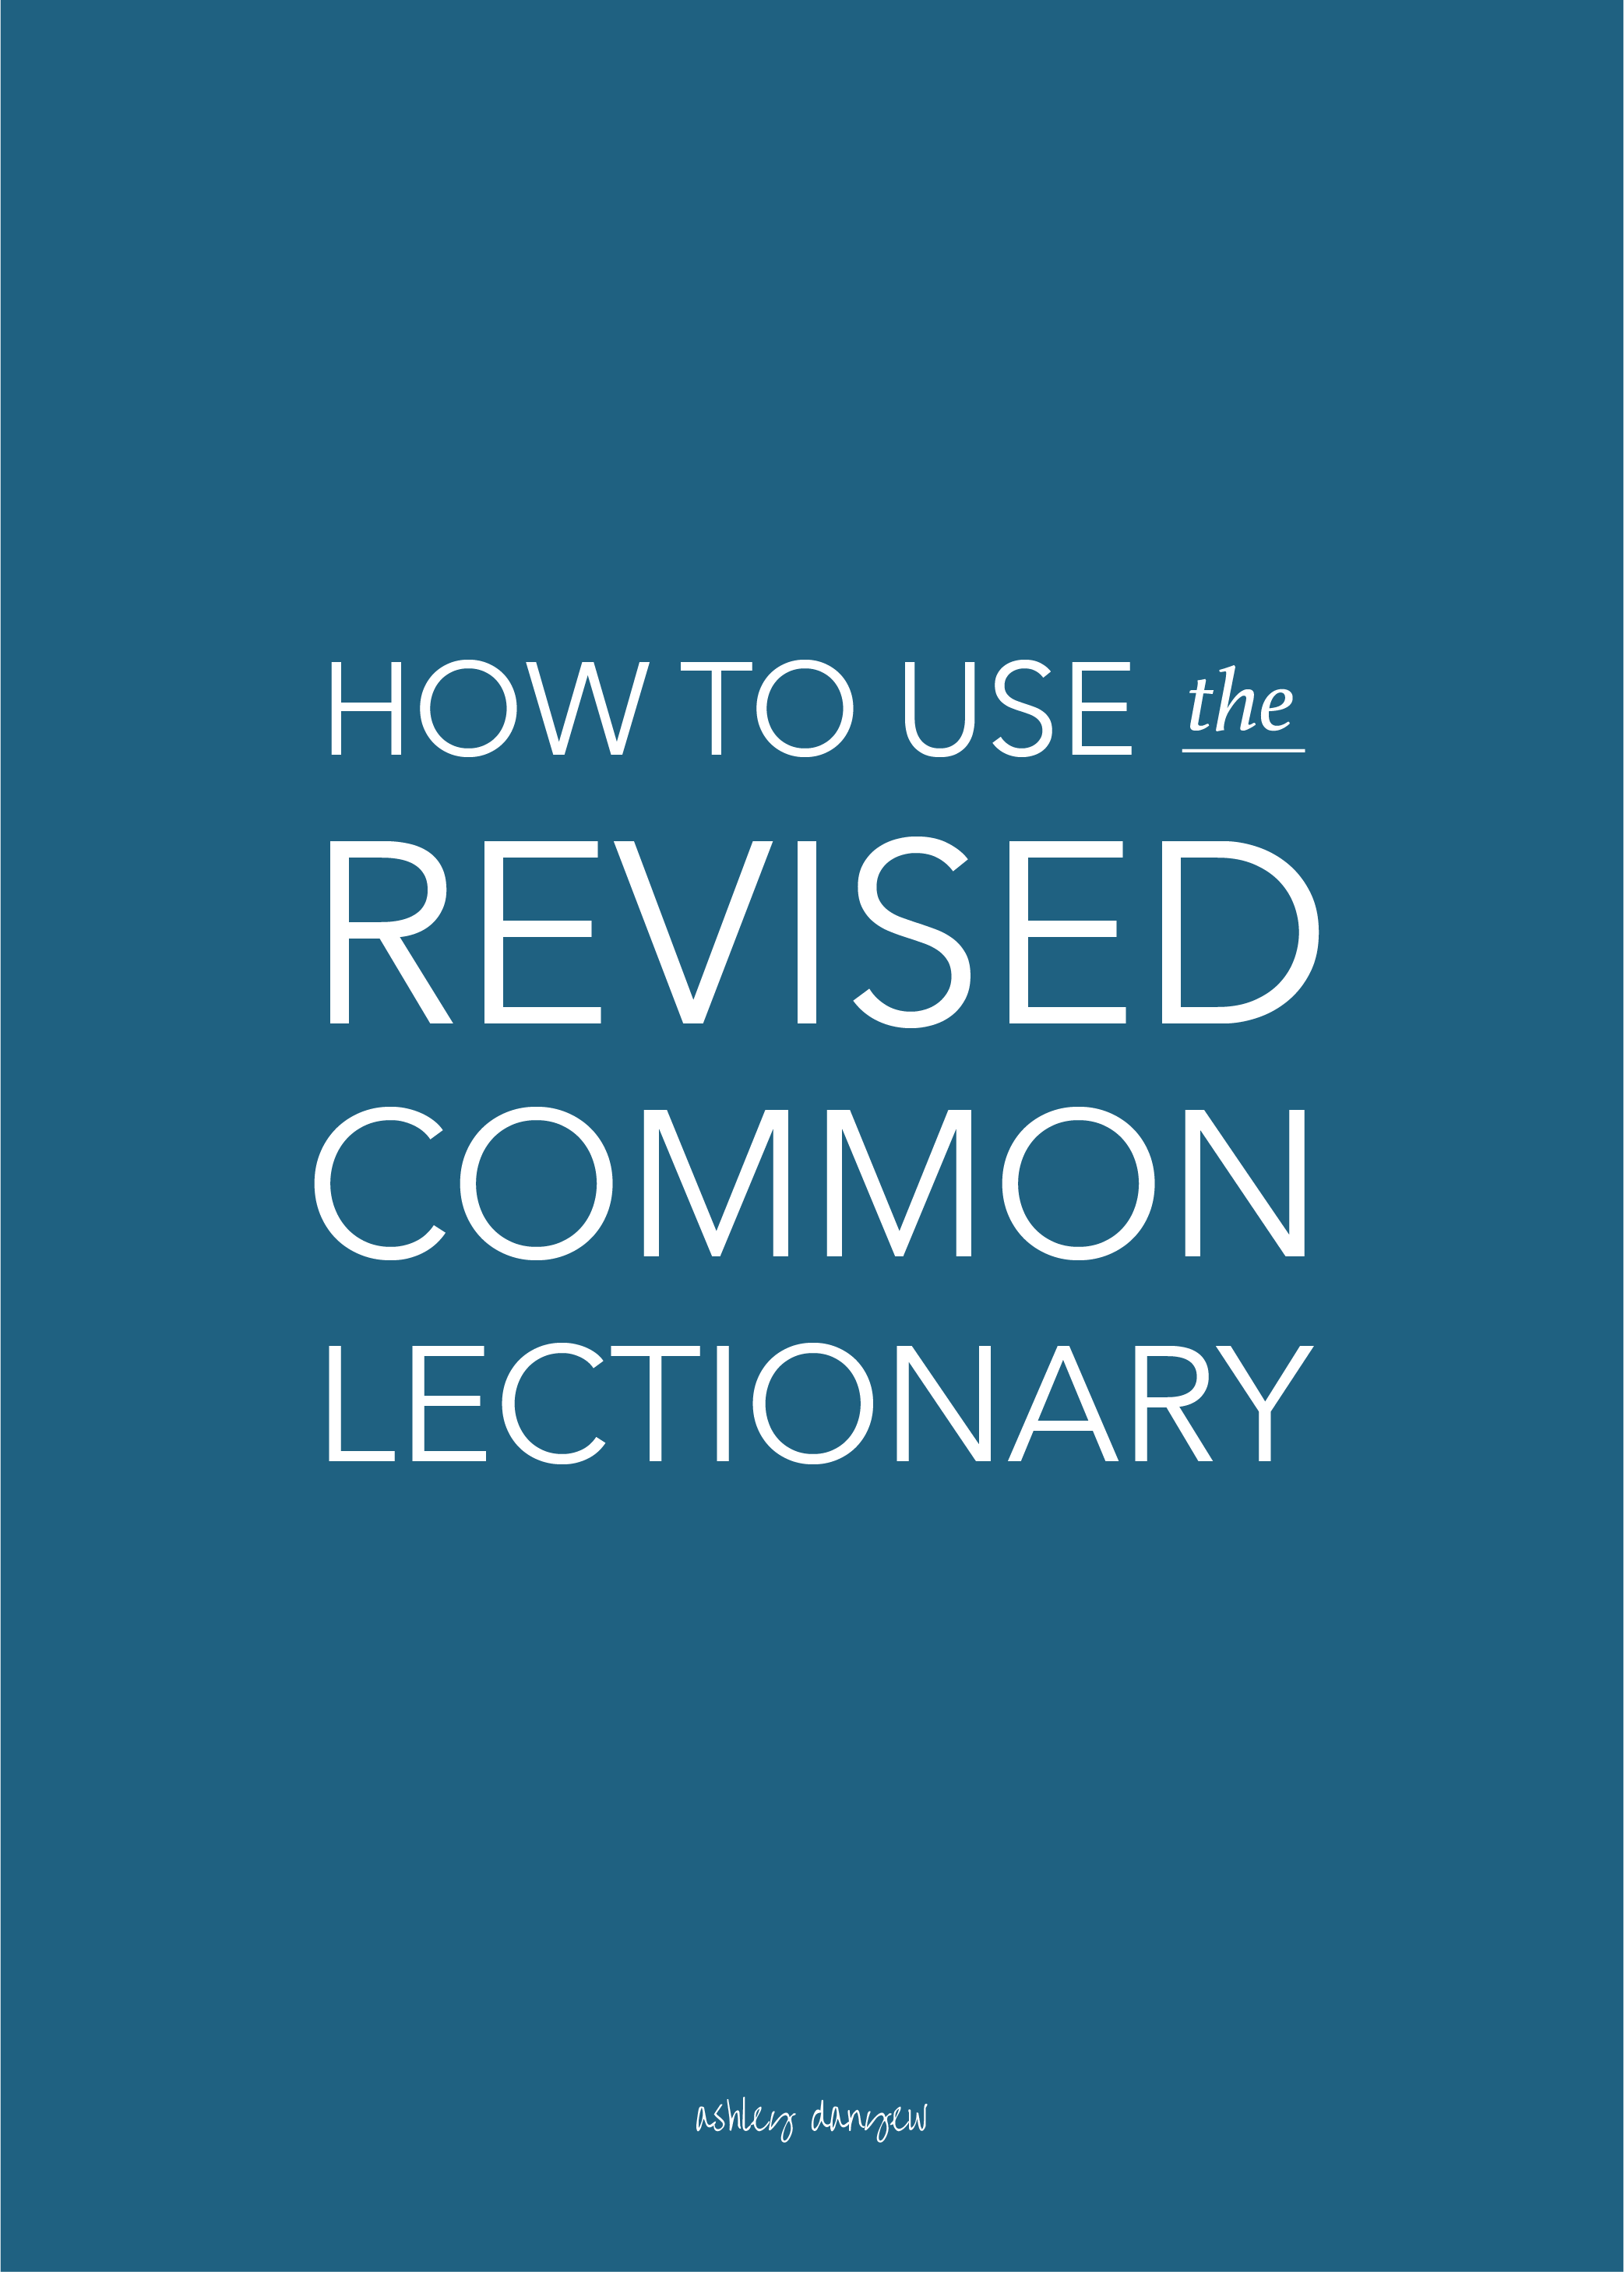 Copy of How to Use the Revised Common Lectionary